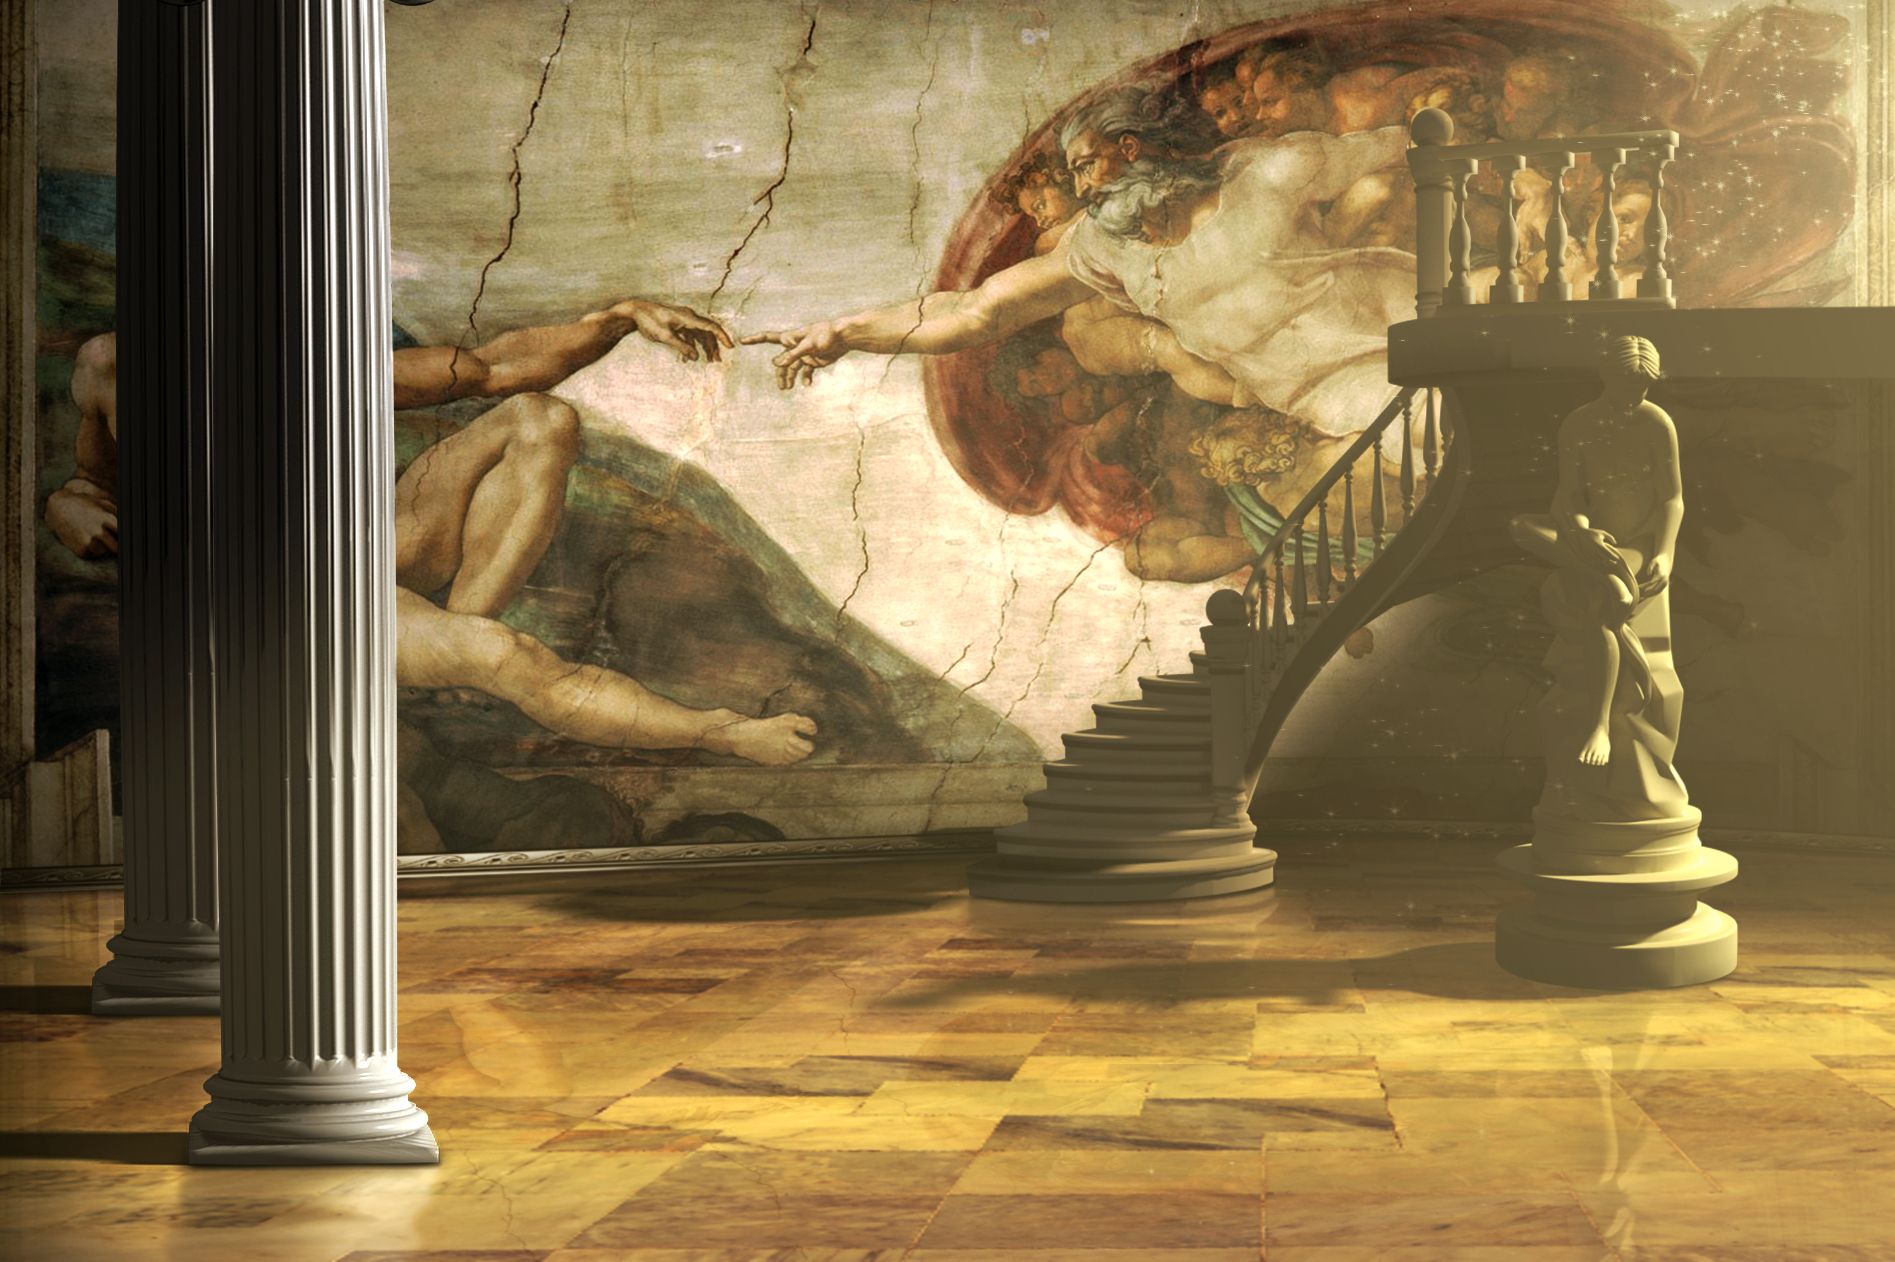 A painting of the creation of Adam on a wall, with a statue of a man holding a lantern in front of it. The background is a staircase and the floor is checkered. - The Creation of Adam